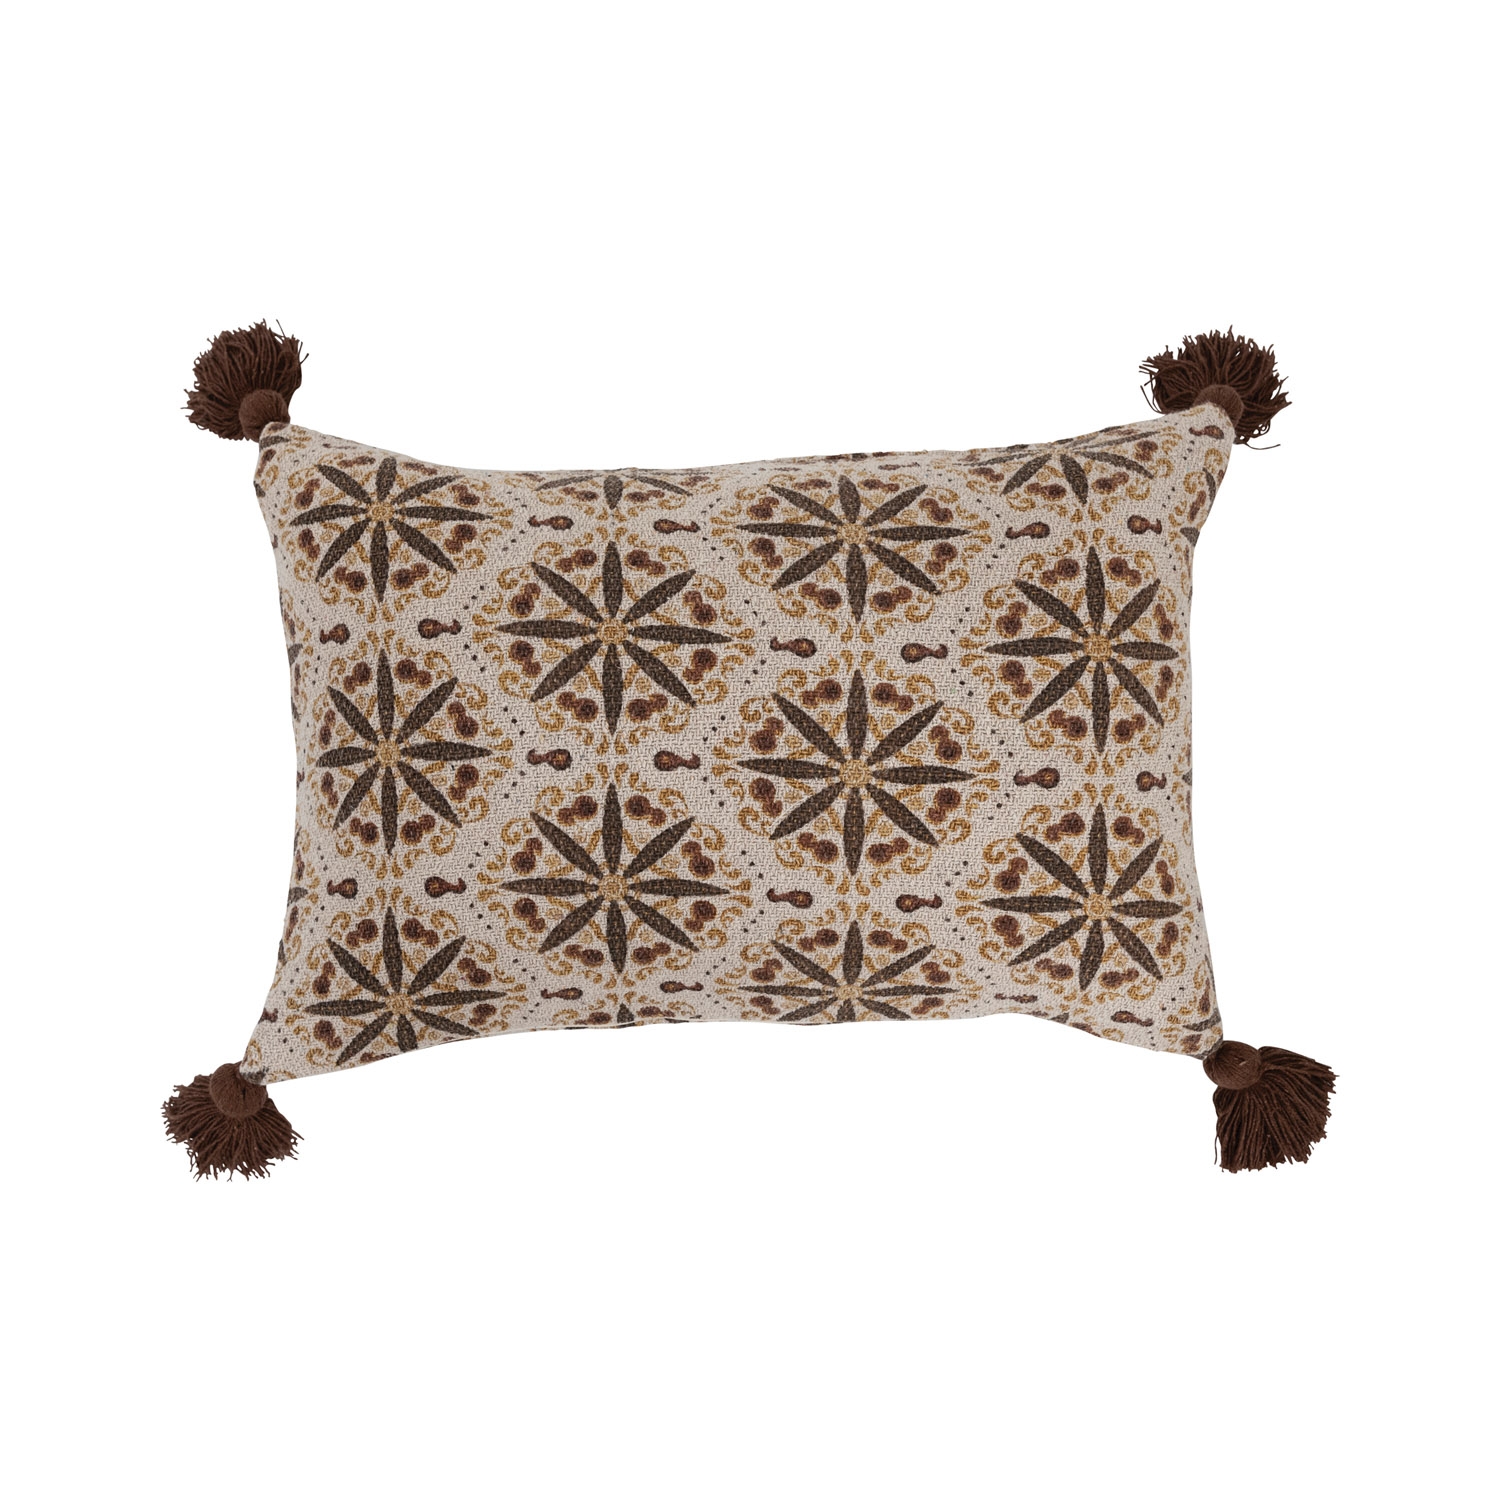 Recycled Cotton Blend Lumbar Pillow with Floral Medallion Print and Tassels - Image 0